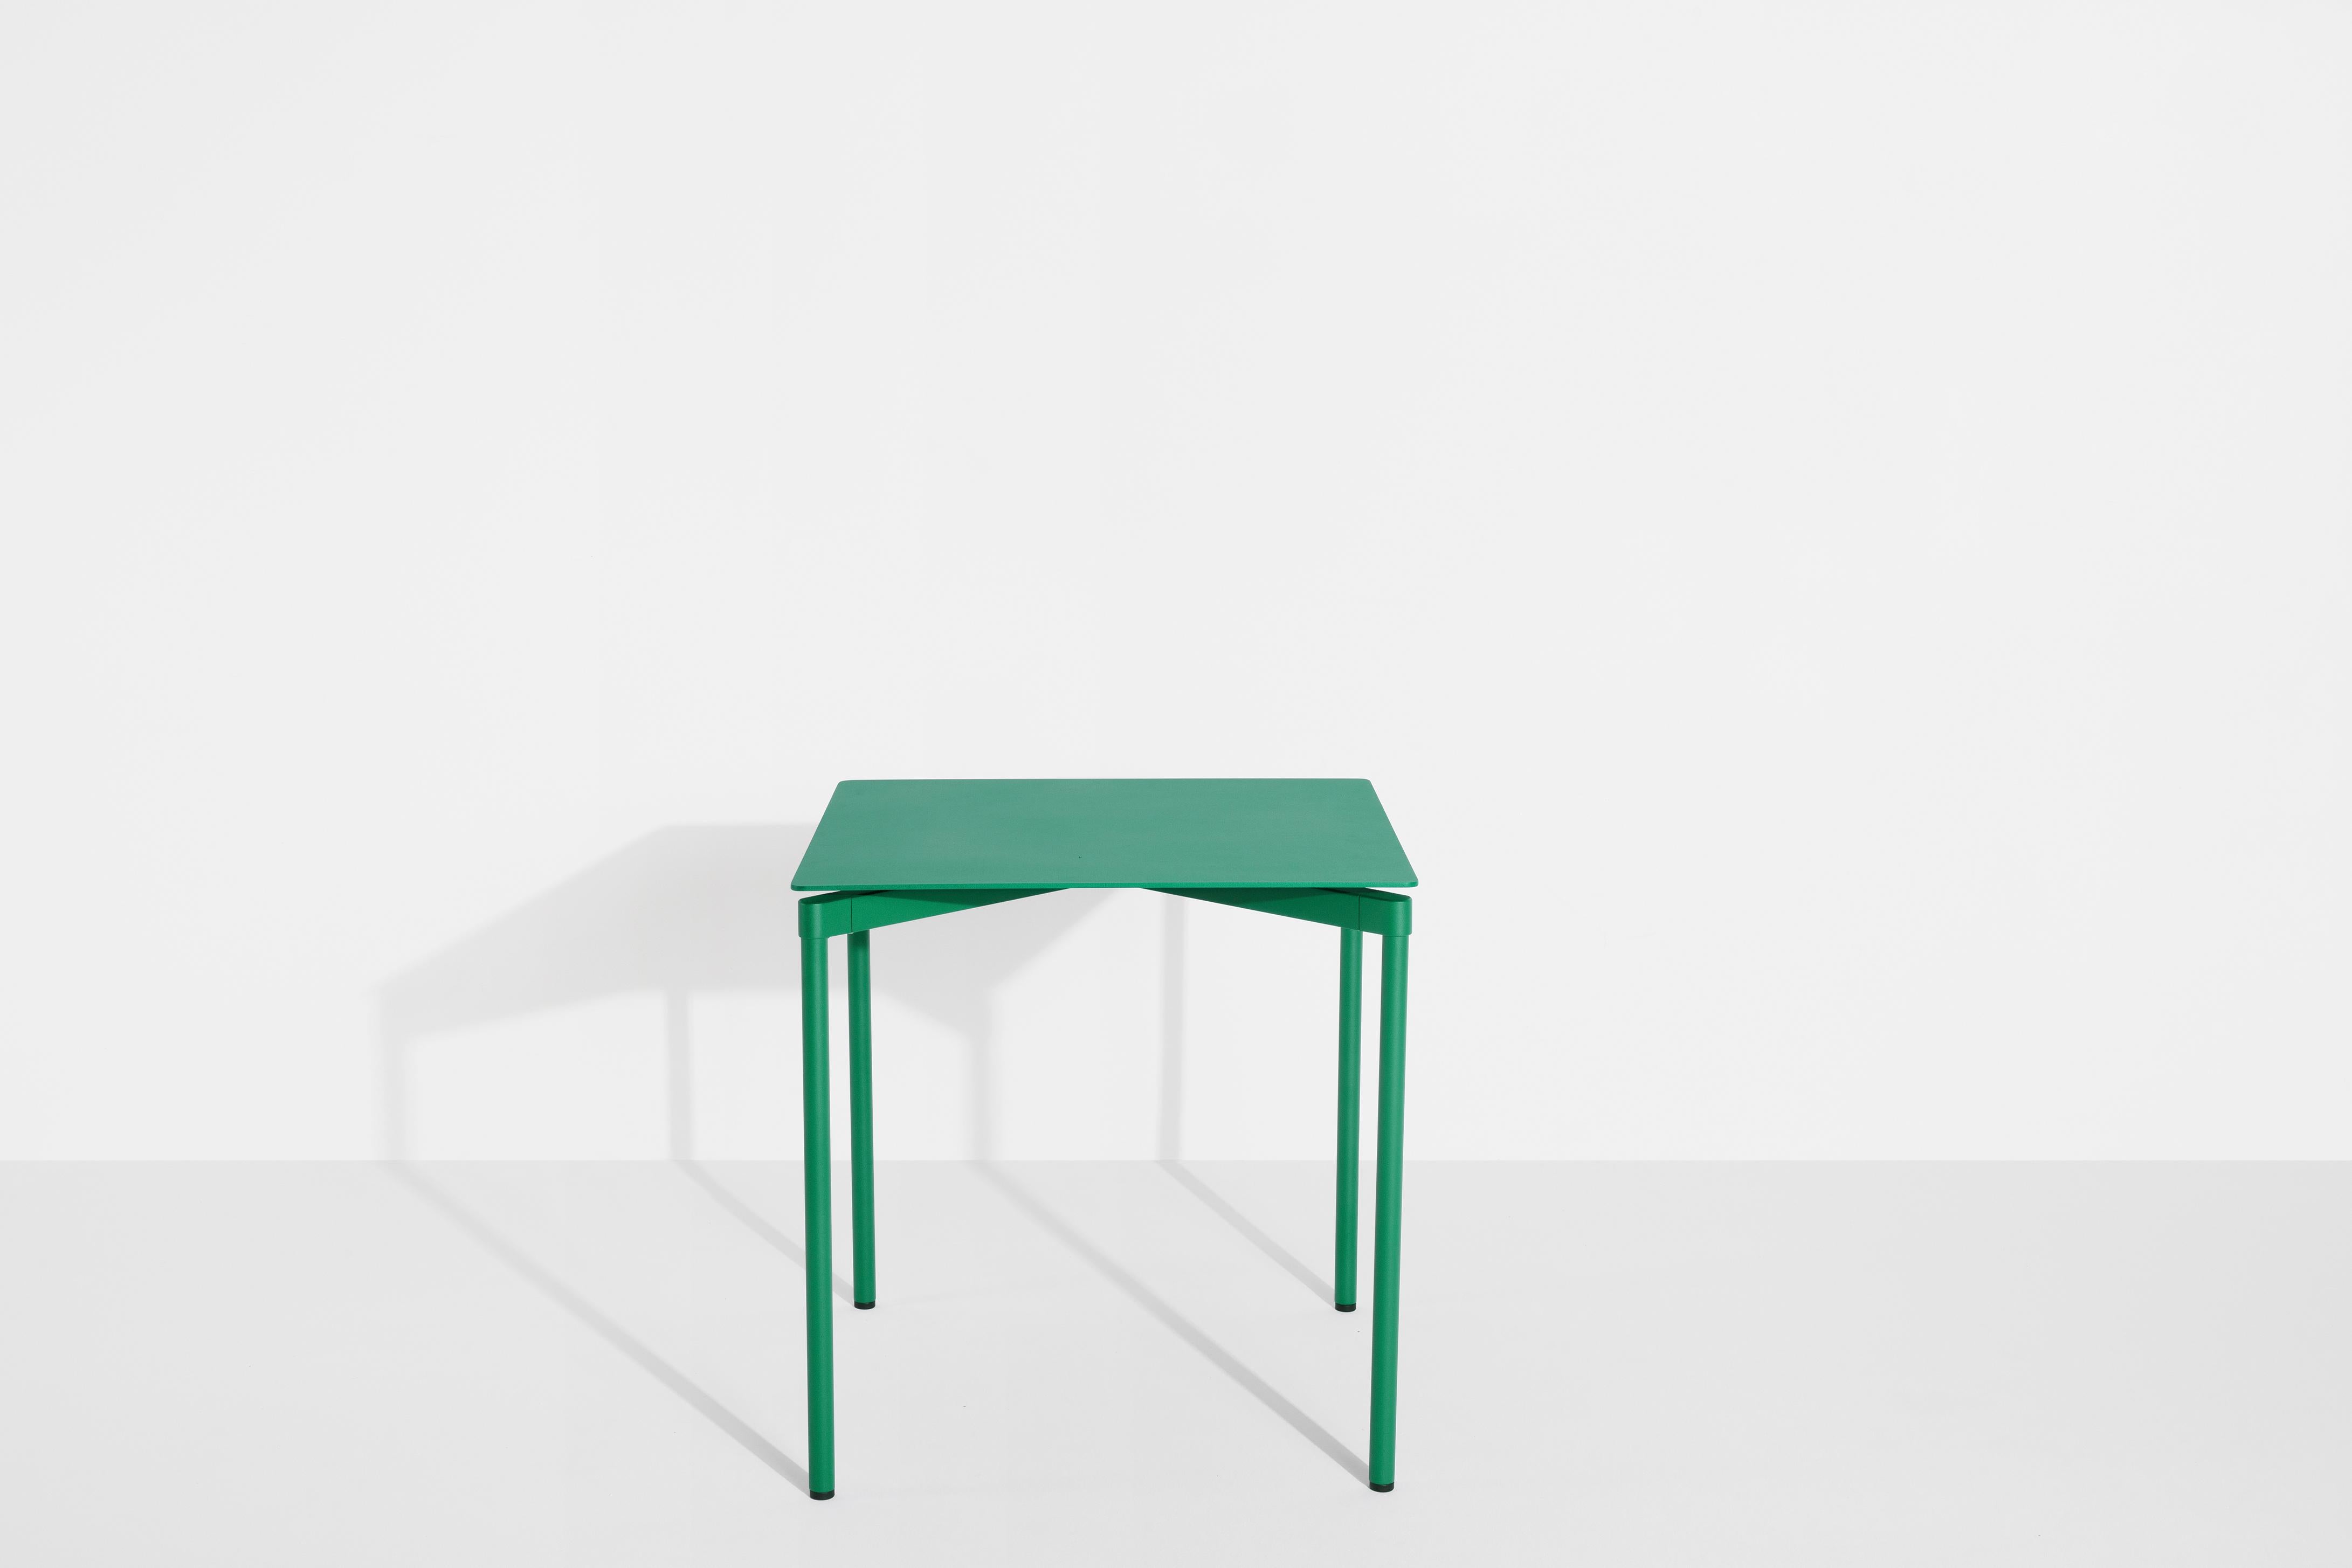 Chinese Petite Friture Fromme Square Table in Mint-Green Aluminium by Tom Chung For Sale